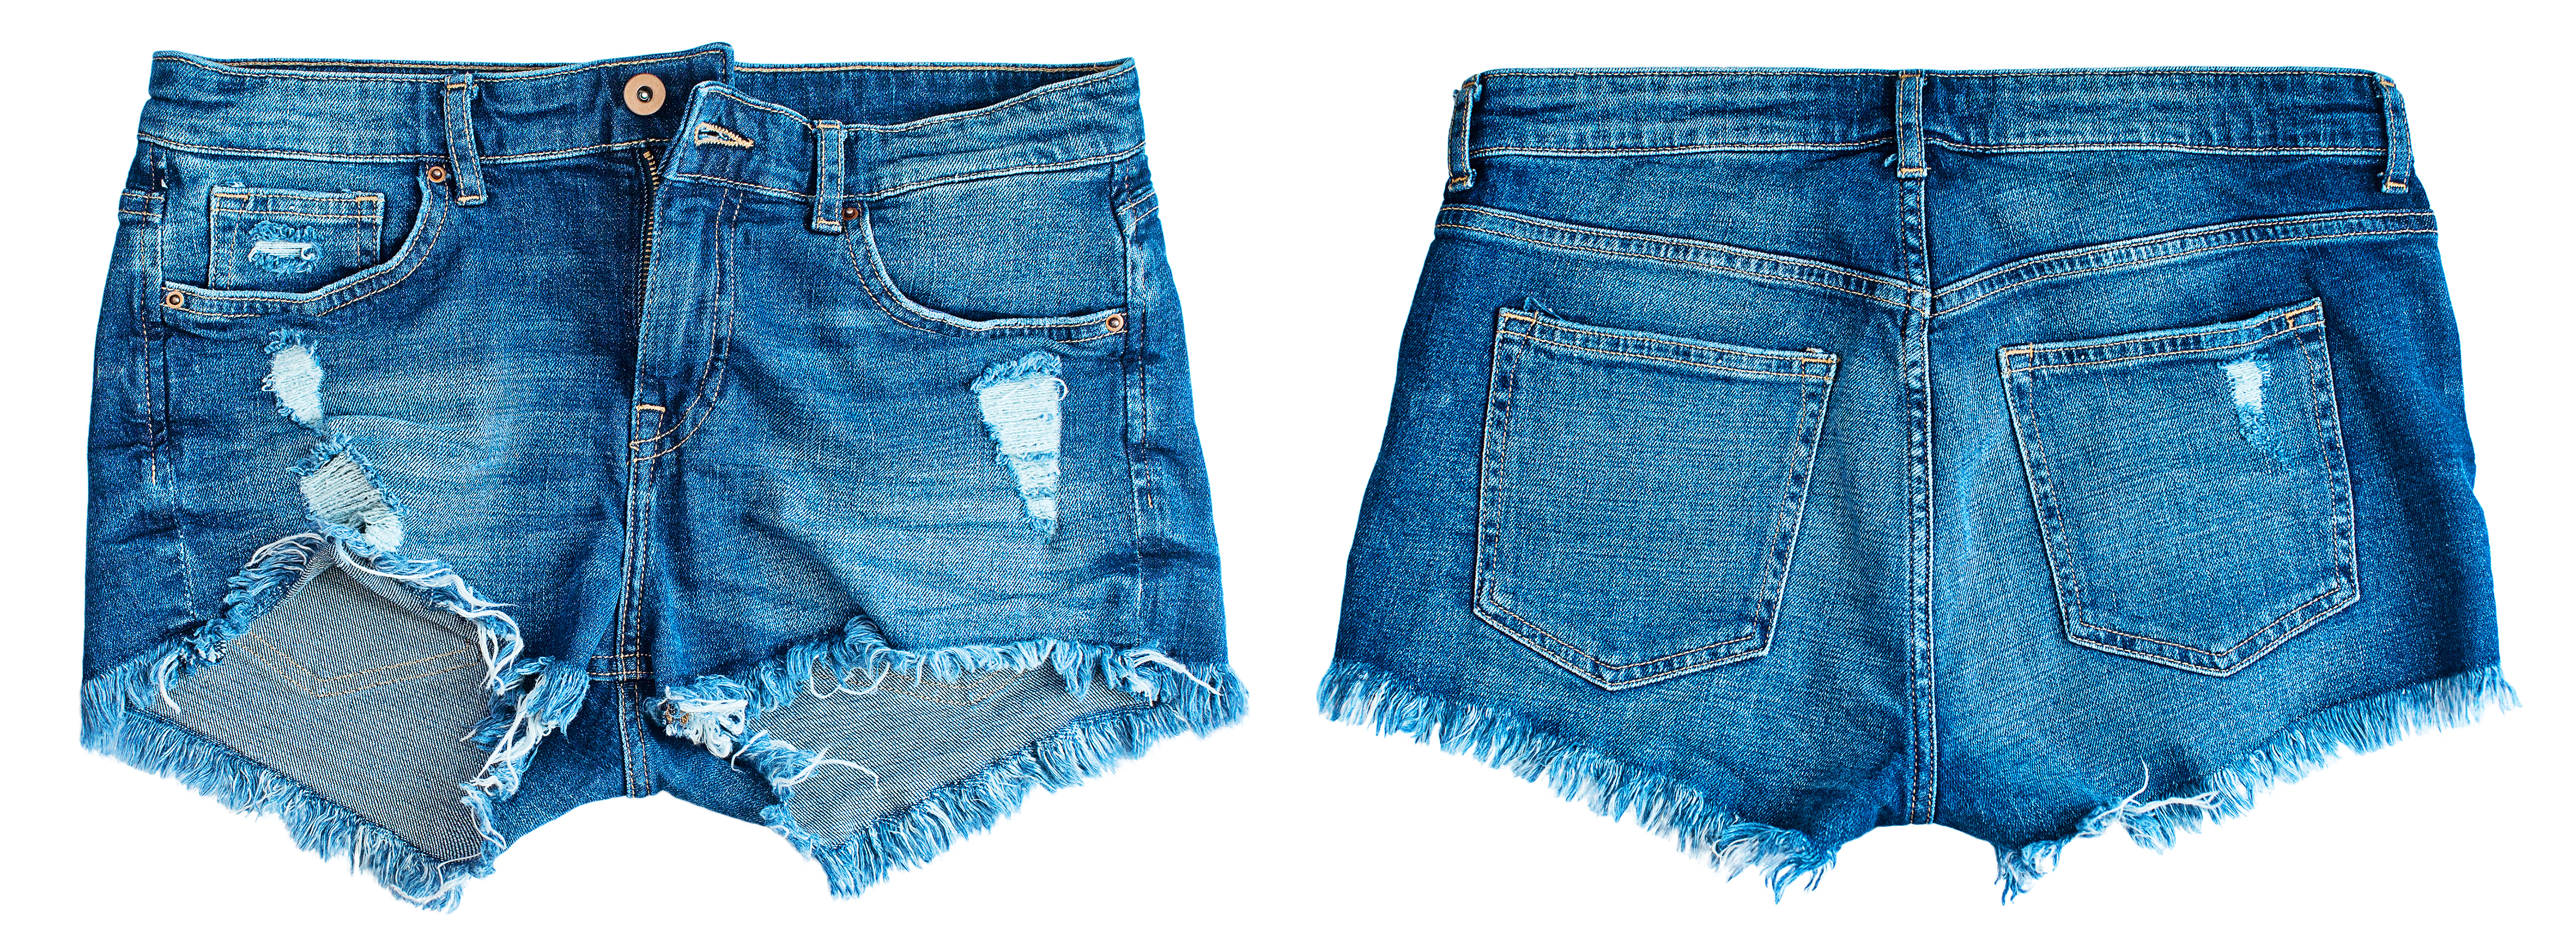 Blue denim shorts might be summer essential we can do without